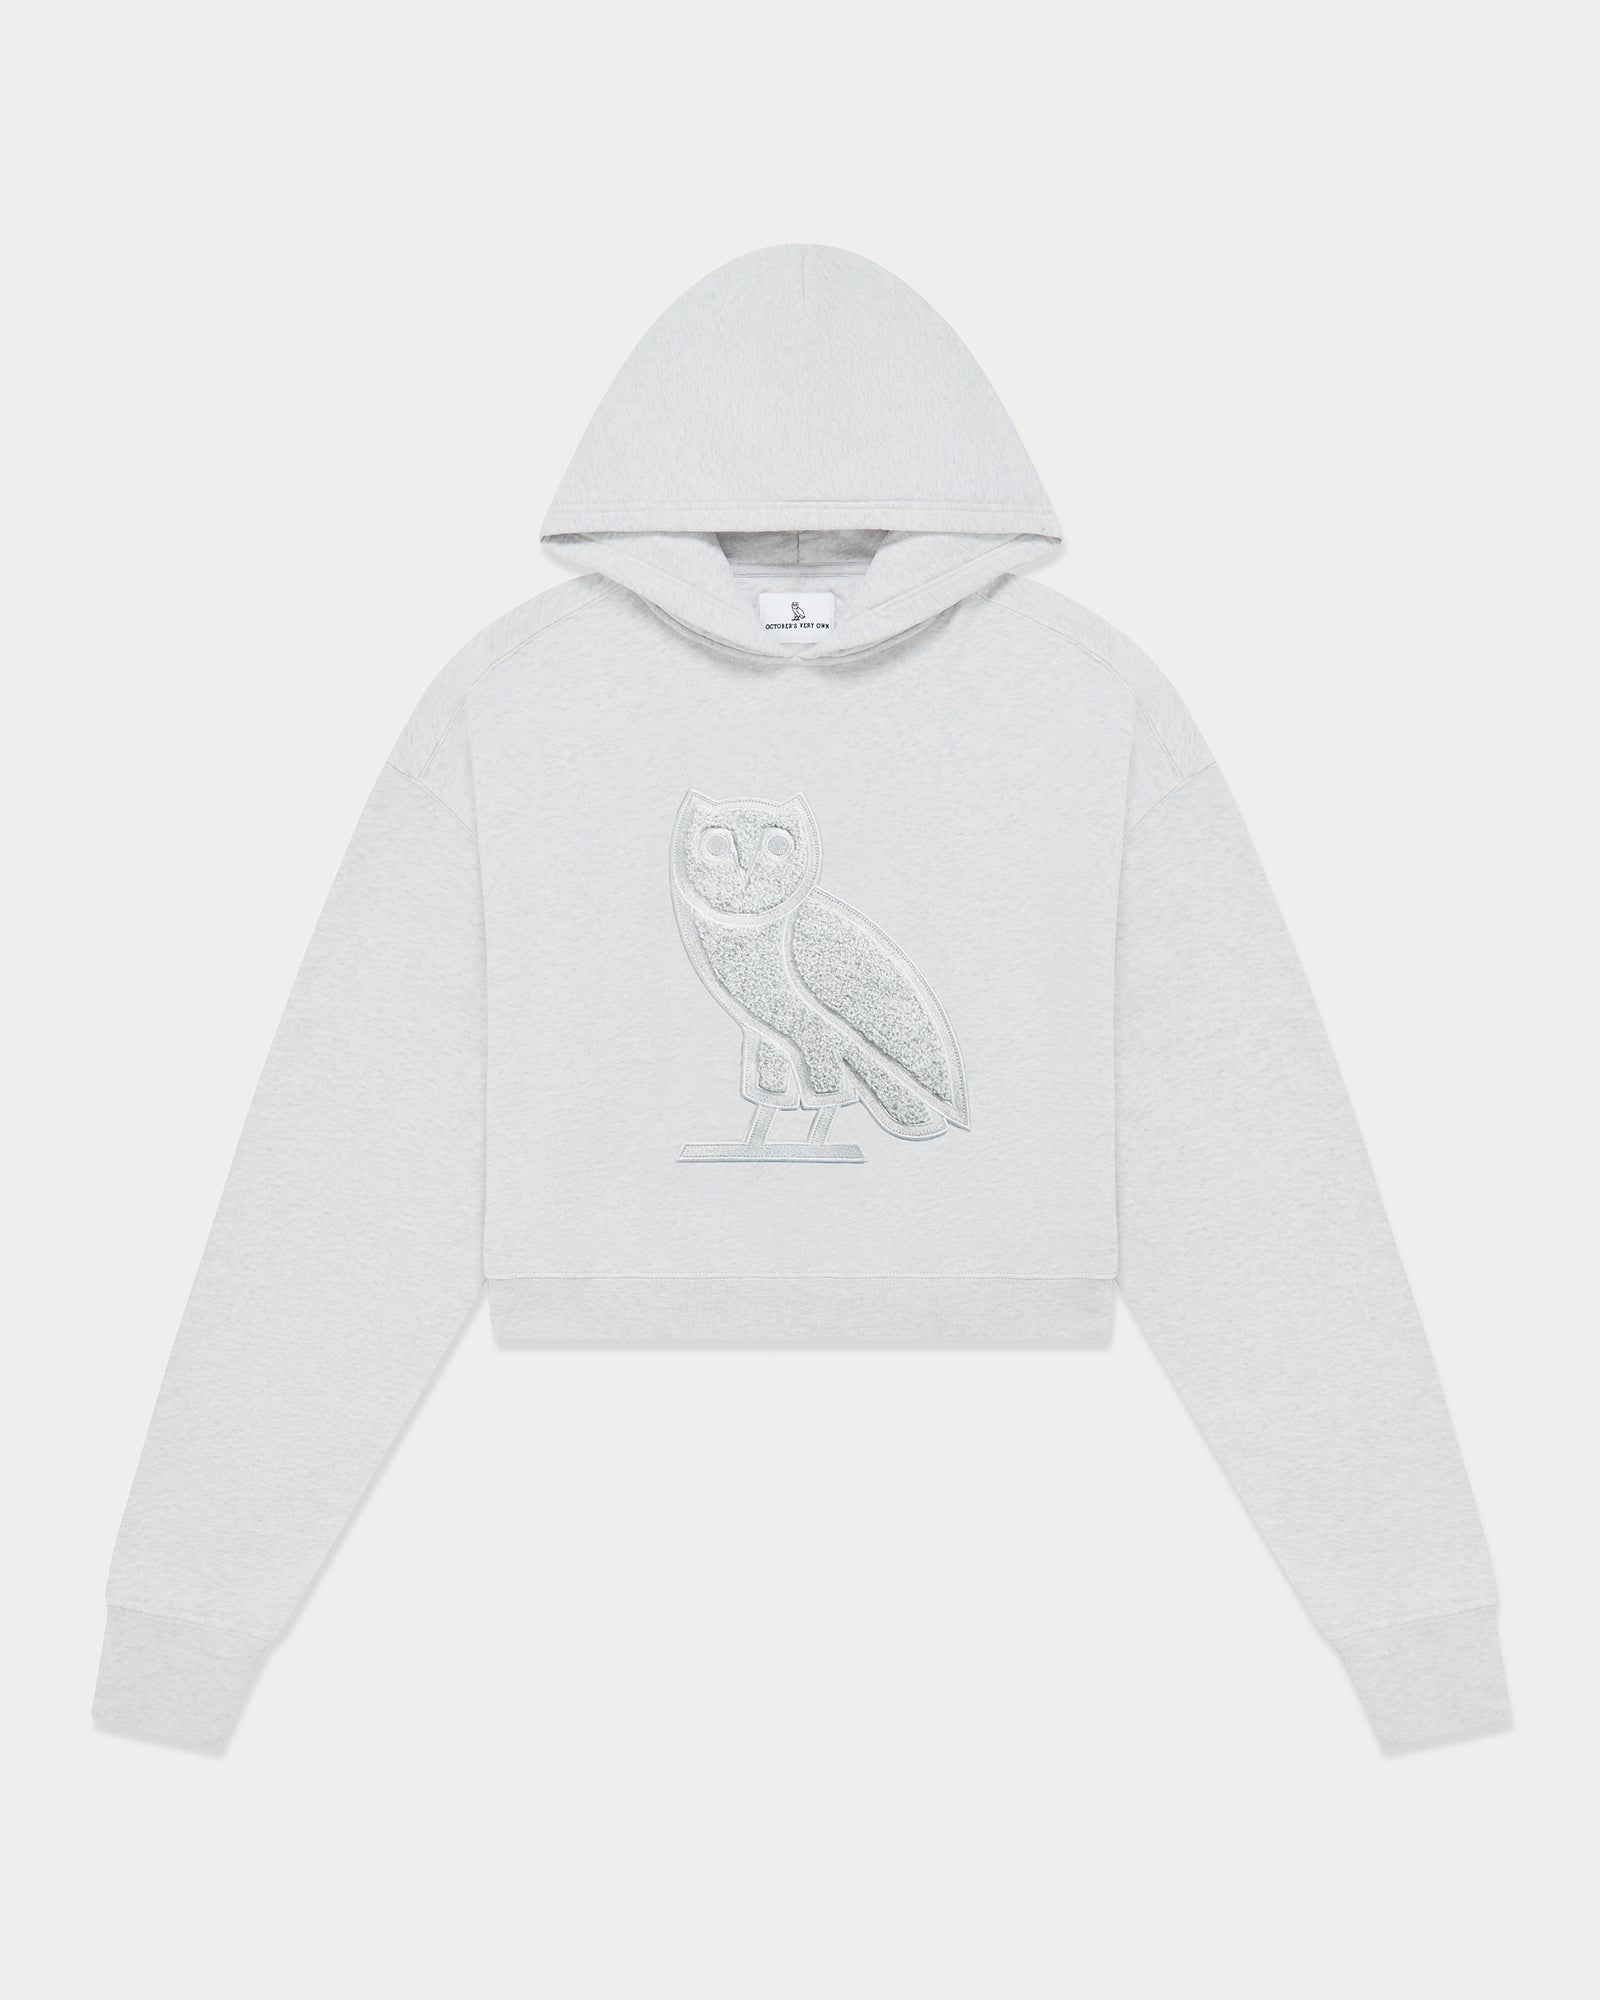 All Day Hoodie - Ash Heather Grey